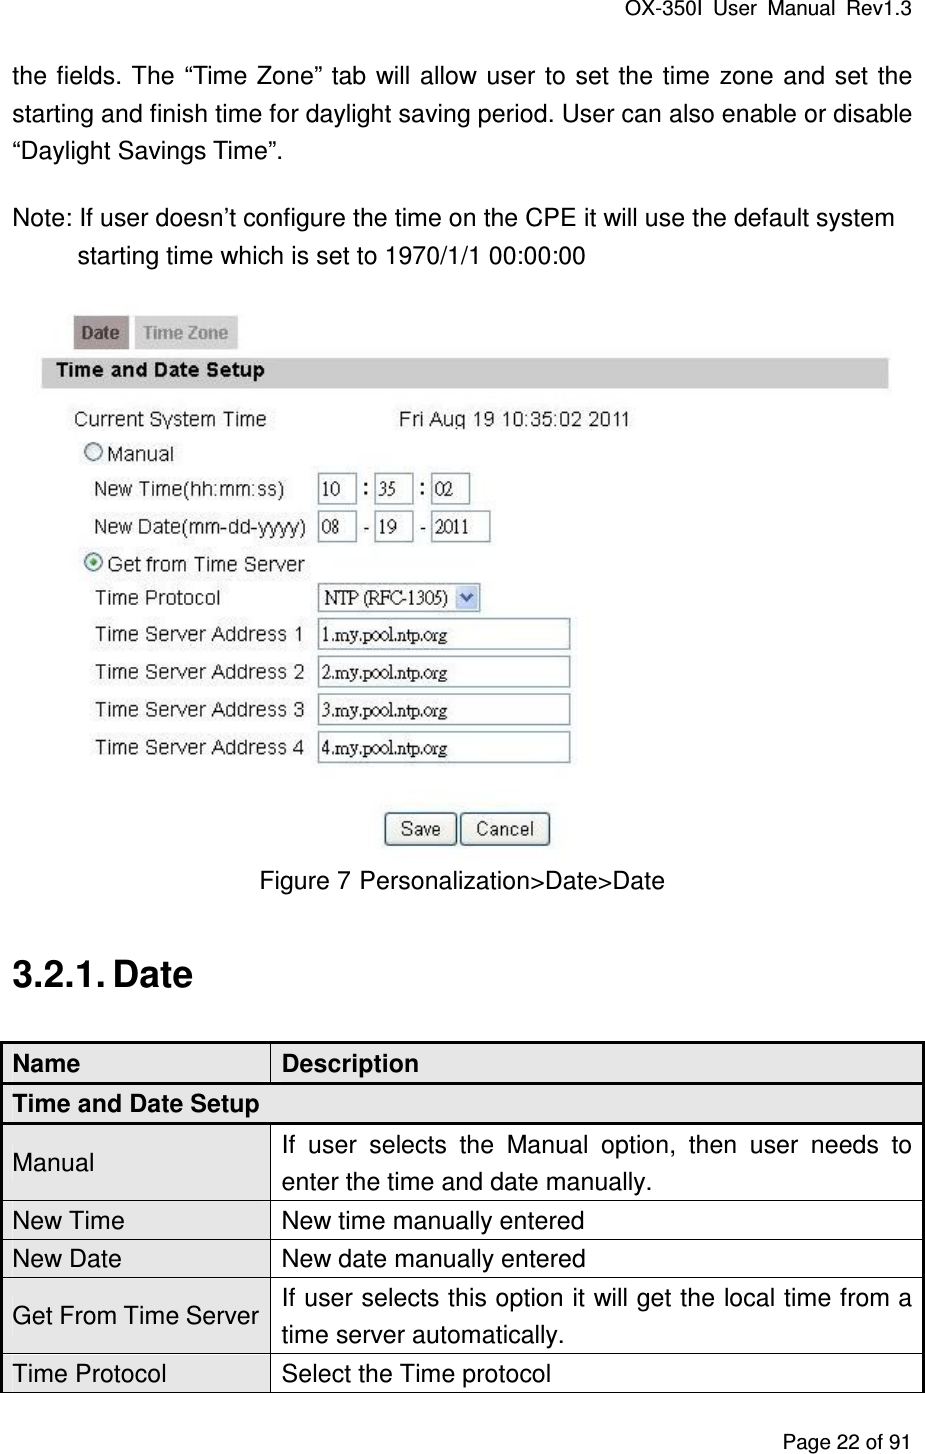 OX-350I  User  Manual  Rev1.3 Page 22 of 91 the fields. The “Time Zone” tab will allow user  to  set the time  zone and set  the starting and finish time for daylight saving period. User can also enable or disable “Daylight Savings Time”. Note: If user doesn’t configure the time on the CPE it will use the default system starting time which is set to 1970/1/1 00:00:00  Figure 7 Personalization&gt;Date&gt;Date 3.2.1. Date Name  Description Time and Date Setup Manual  If  user  selects  the  Manual  option,  then  user  needs  to enter the time and date manually. New Time  New time manually entered New Date  New date manually entered Get From Time Server If user selects this option it will get the local time from a time server automatically. Time Protocol  Select the Time protocol 